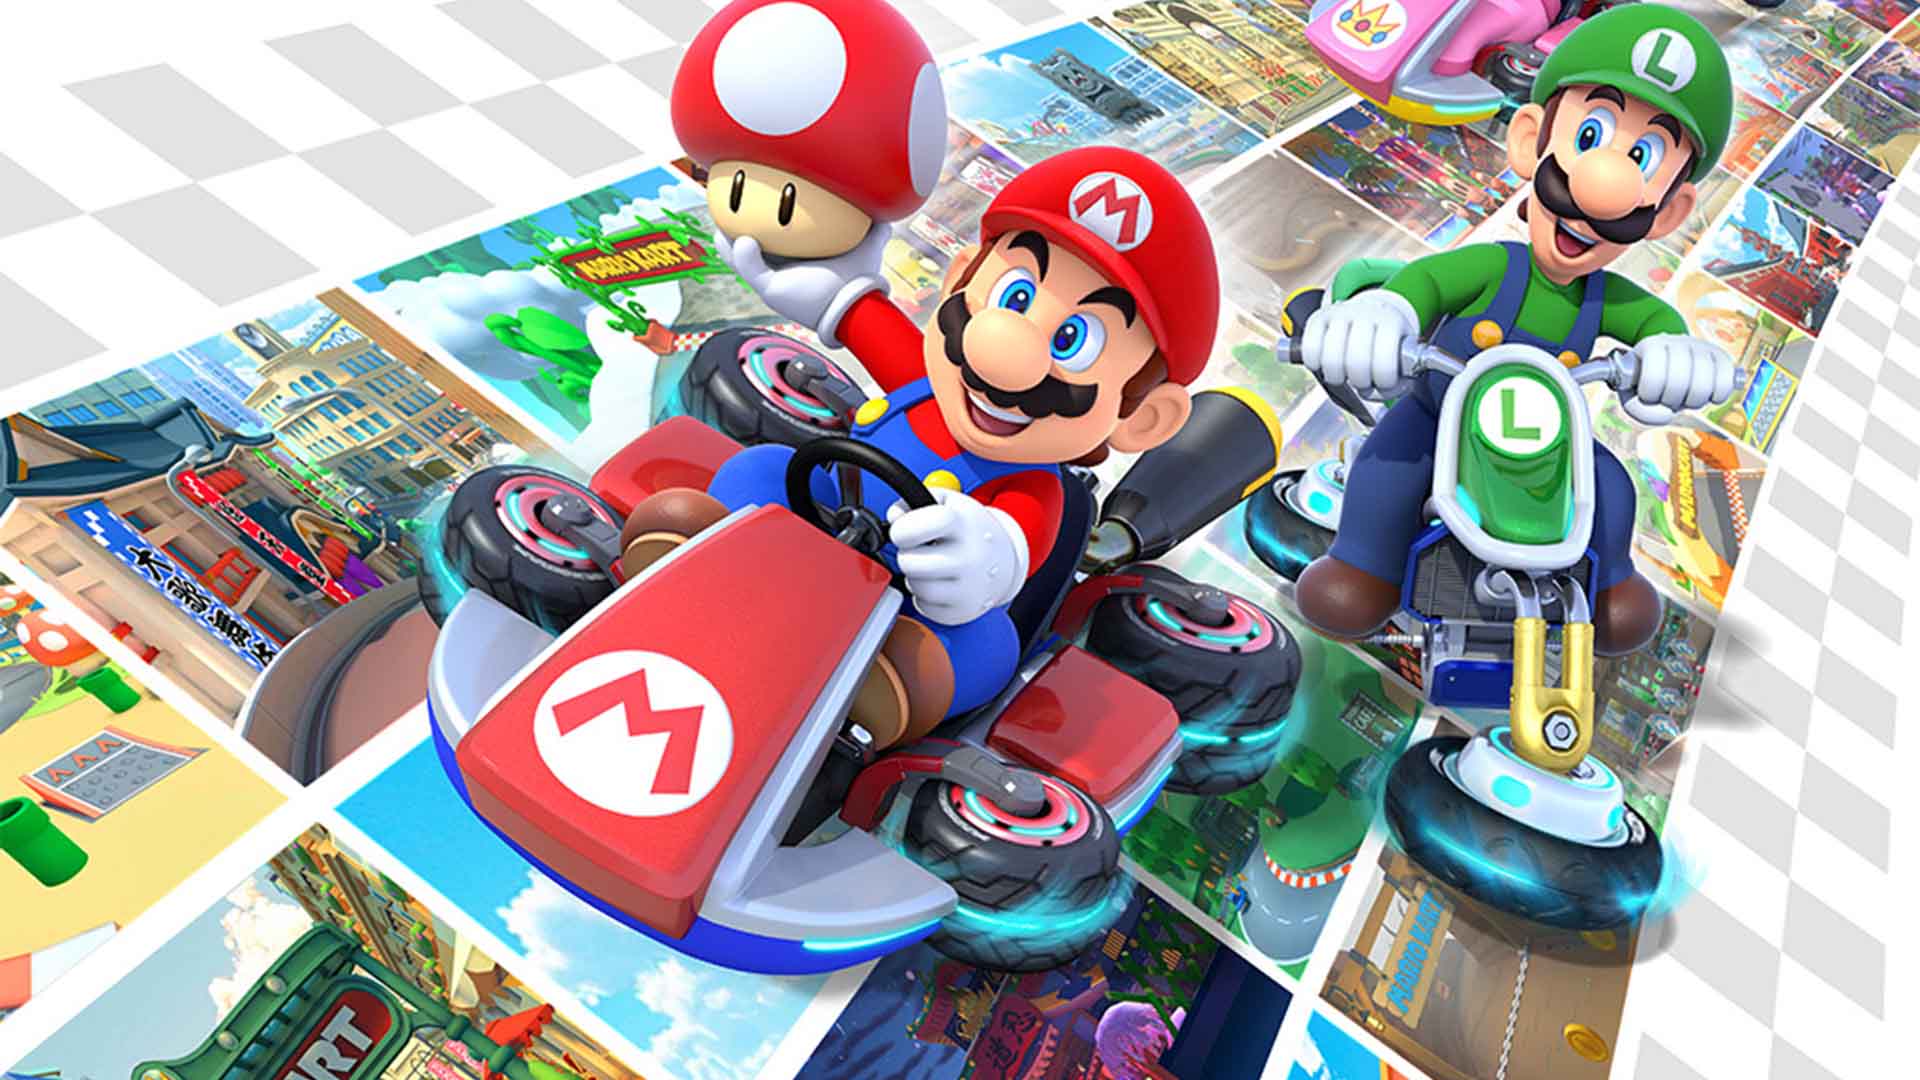 Mario Kart 8 Deluxe and Donkey Kong Video Games for Nintendo